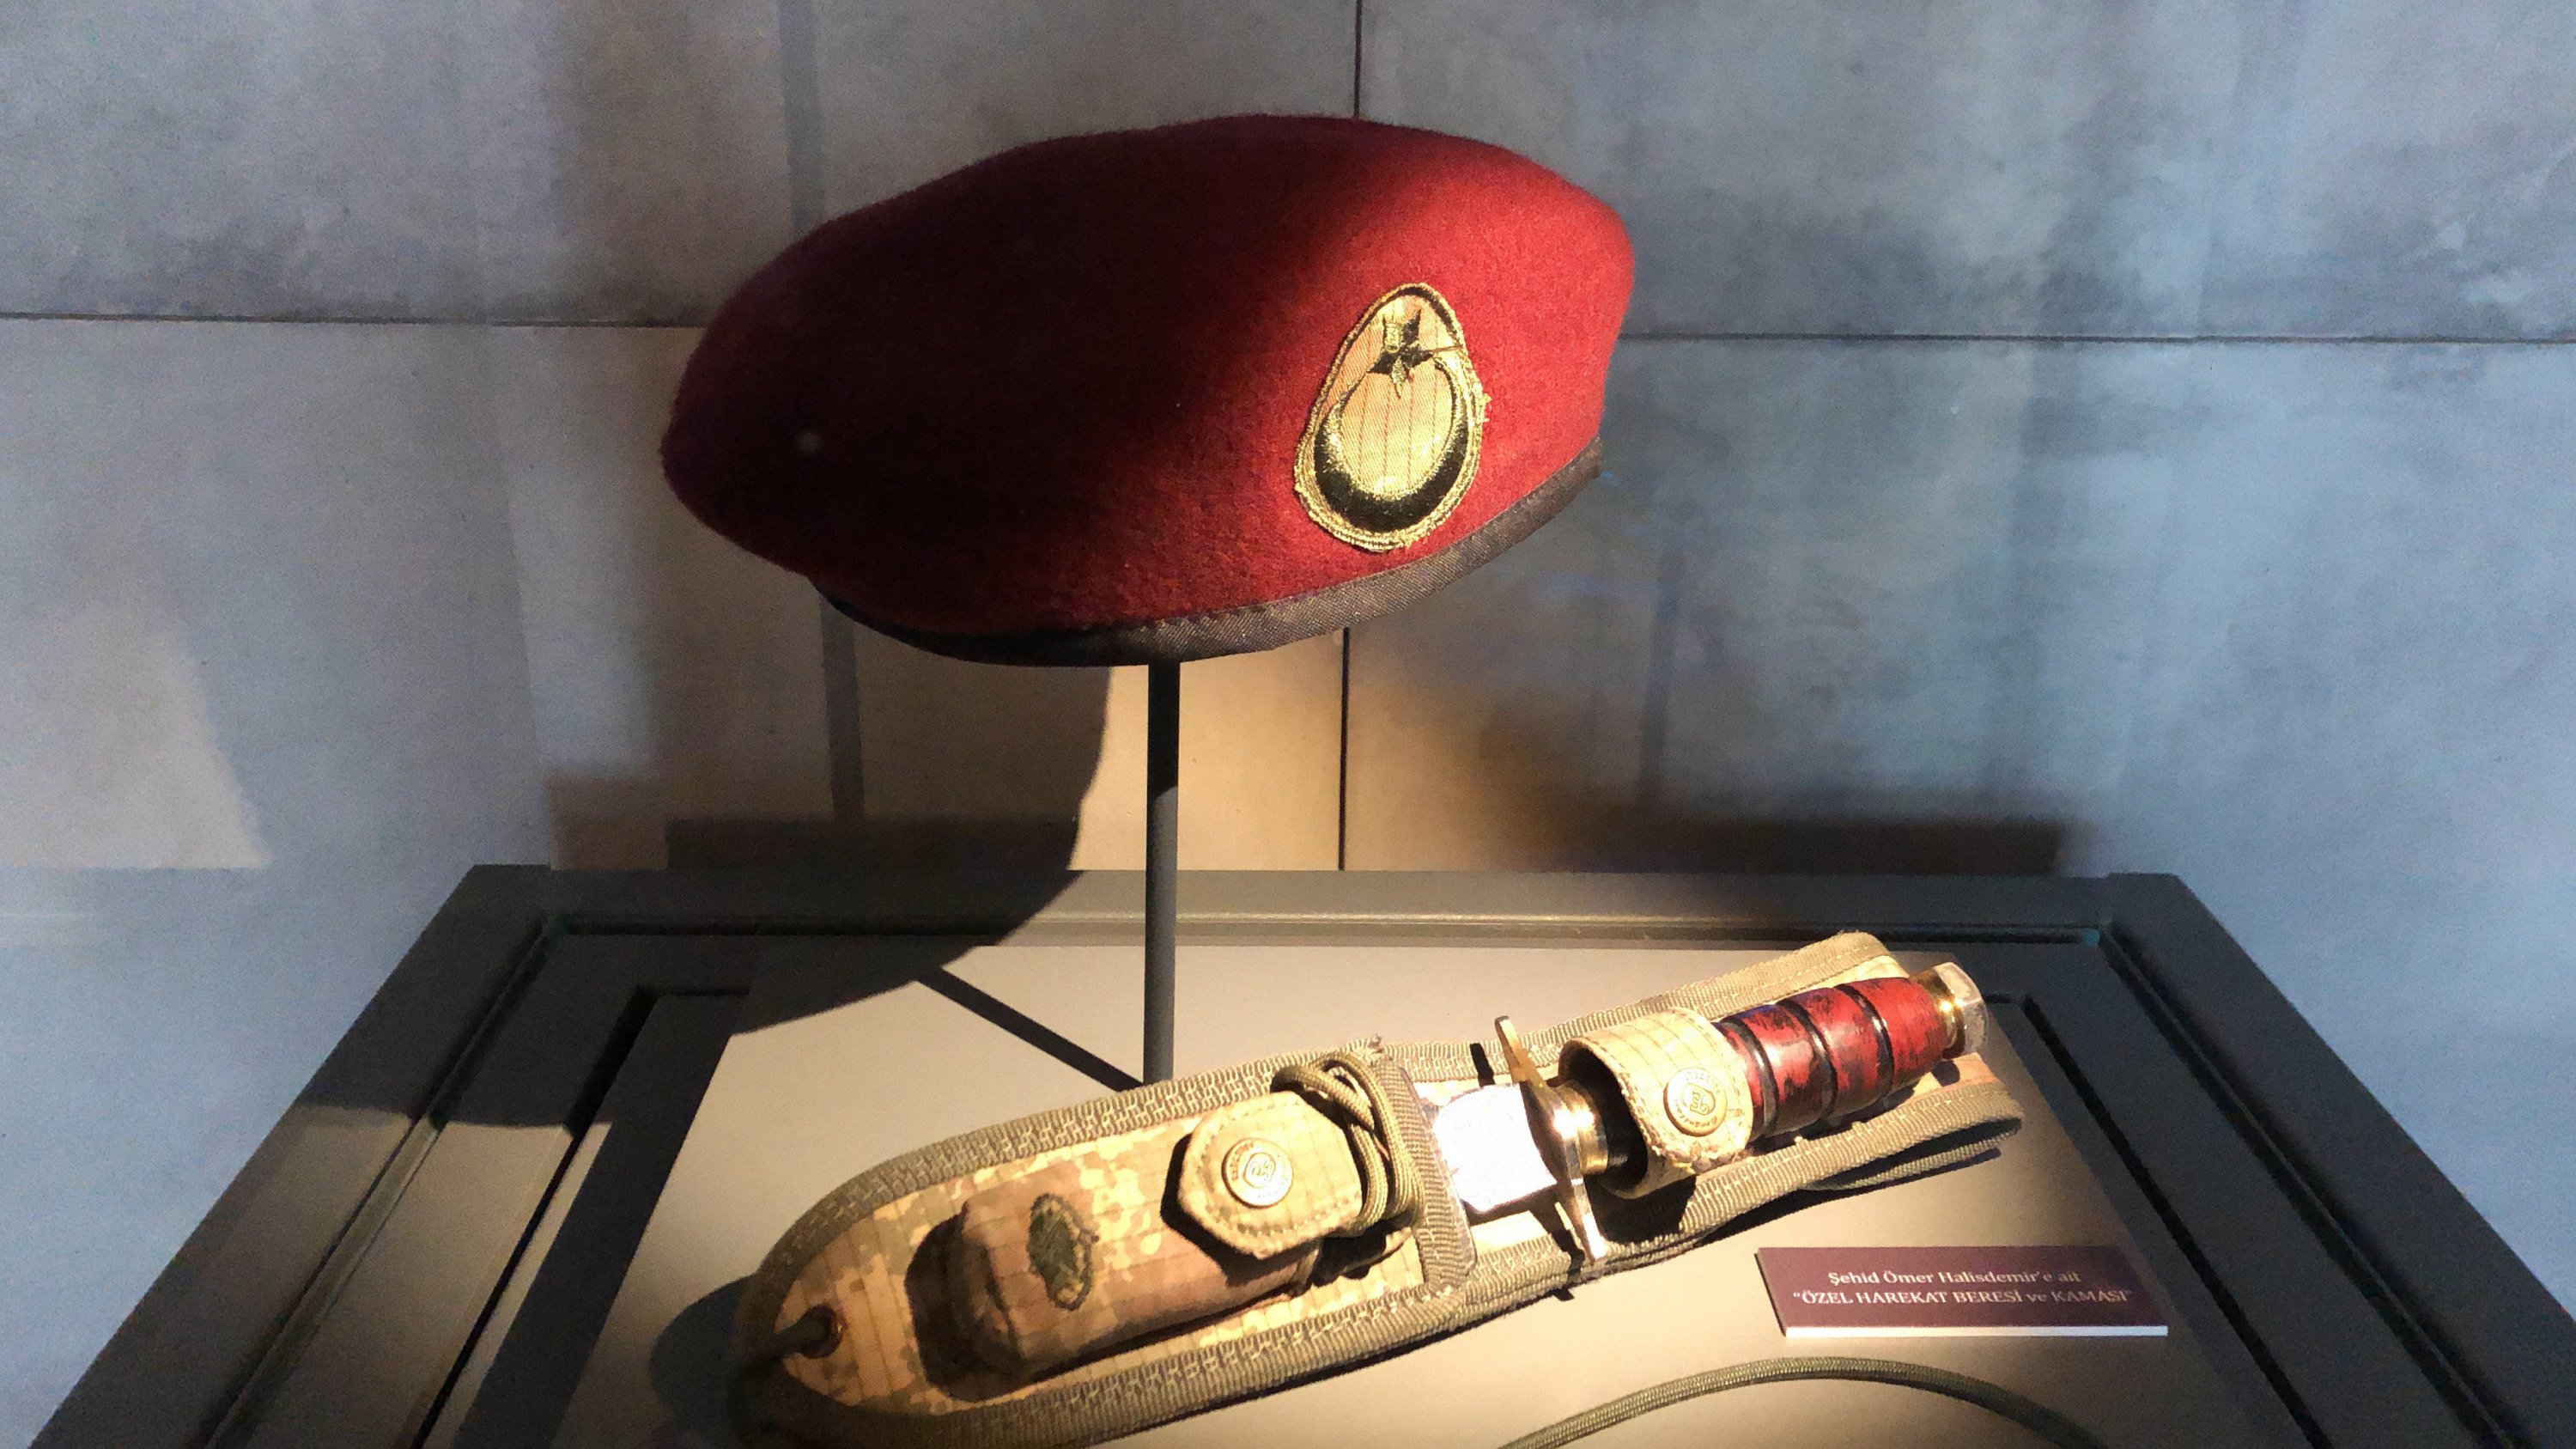 The cap and dagger of deceased non-commissioned officer Ömer Halisdemir at the museum in Istanbul, July 19, 2019. (THA PHOTO)